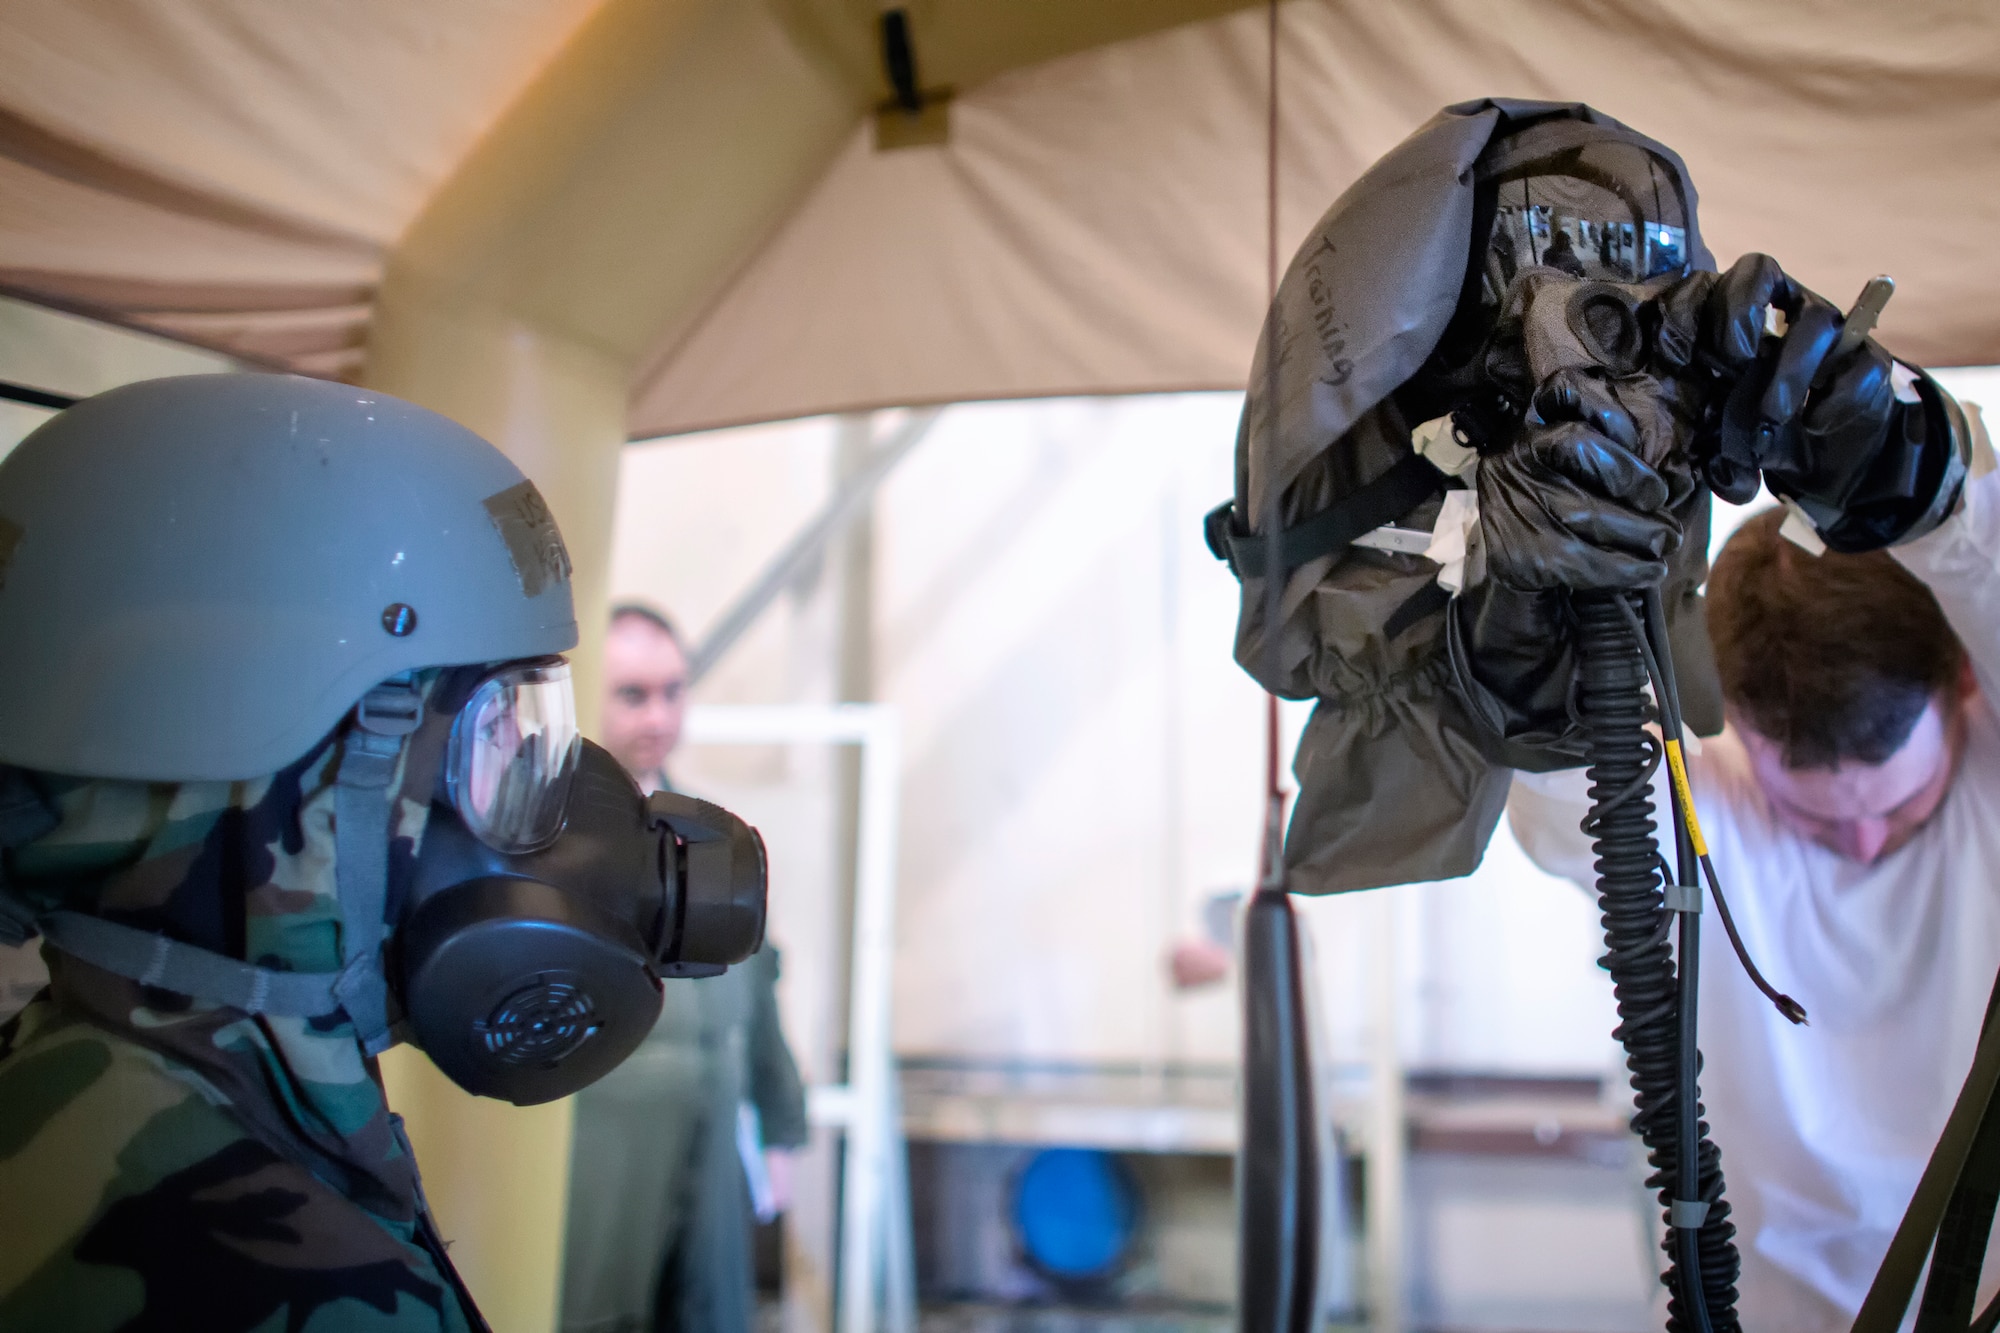 Staff Sgt. Katie Powell, 374th Operations Support Squadron aircrew flight equipment, monitors mask removal during a Samurai Readiness Inspection at Yokota Air Base, Japan, May 20, 2015. Airmen from the 36th Airlift Squadron and 374th OSS performed aircrew decontamination procedures with the Lightweight Inflatable Decontamination System (LIDS). The LIDS takes about 20 minutes to set up and consists of four stations for rinsing off excess chemicals and a process to dispose of contaminated clothing and aircrew equipment. (U.S. Air Force photo by Osakabe Yasuo/Released)